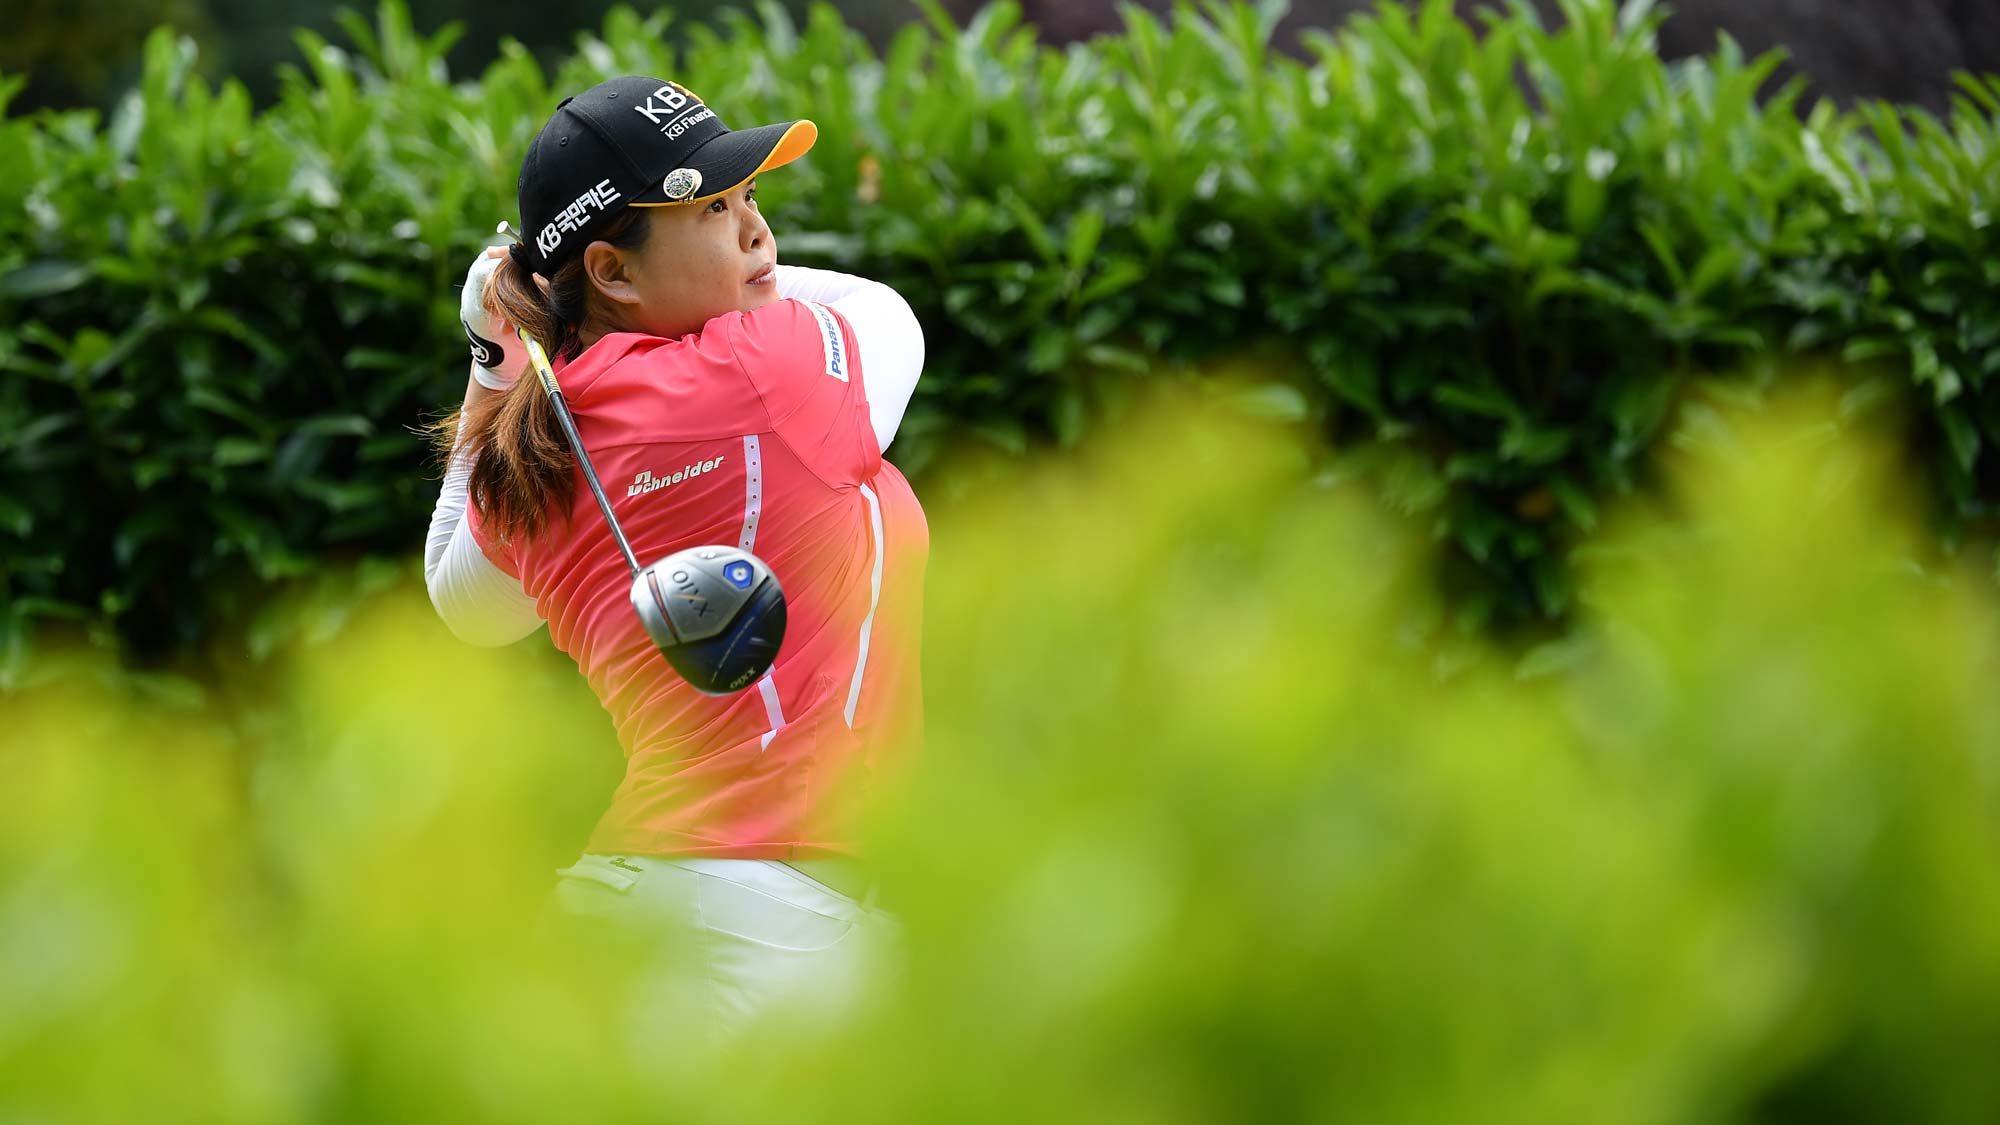 Inbee Park of Korea plays a shot during day 3 of the Evian Championship